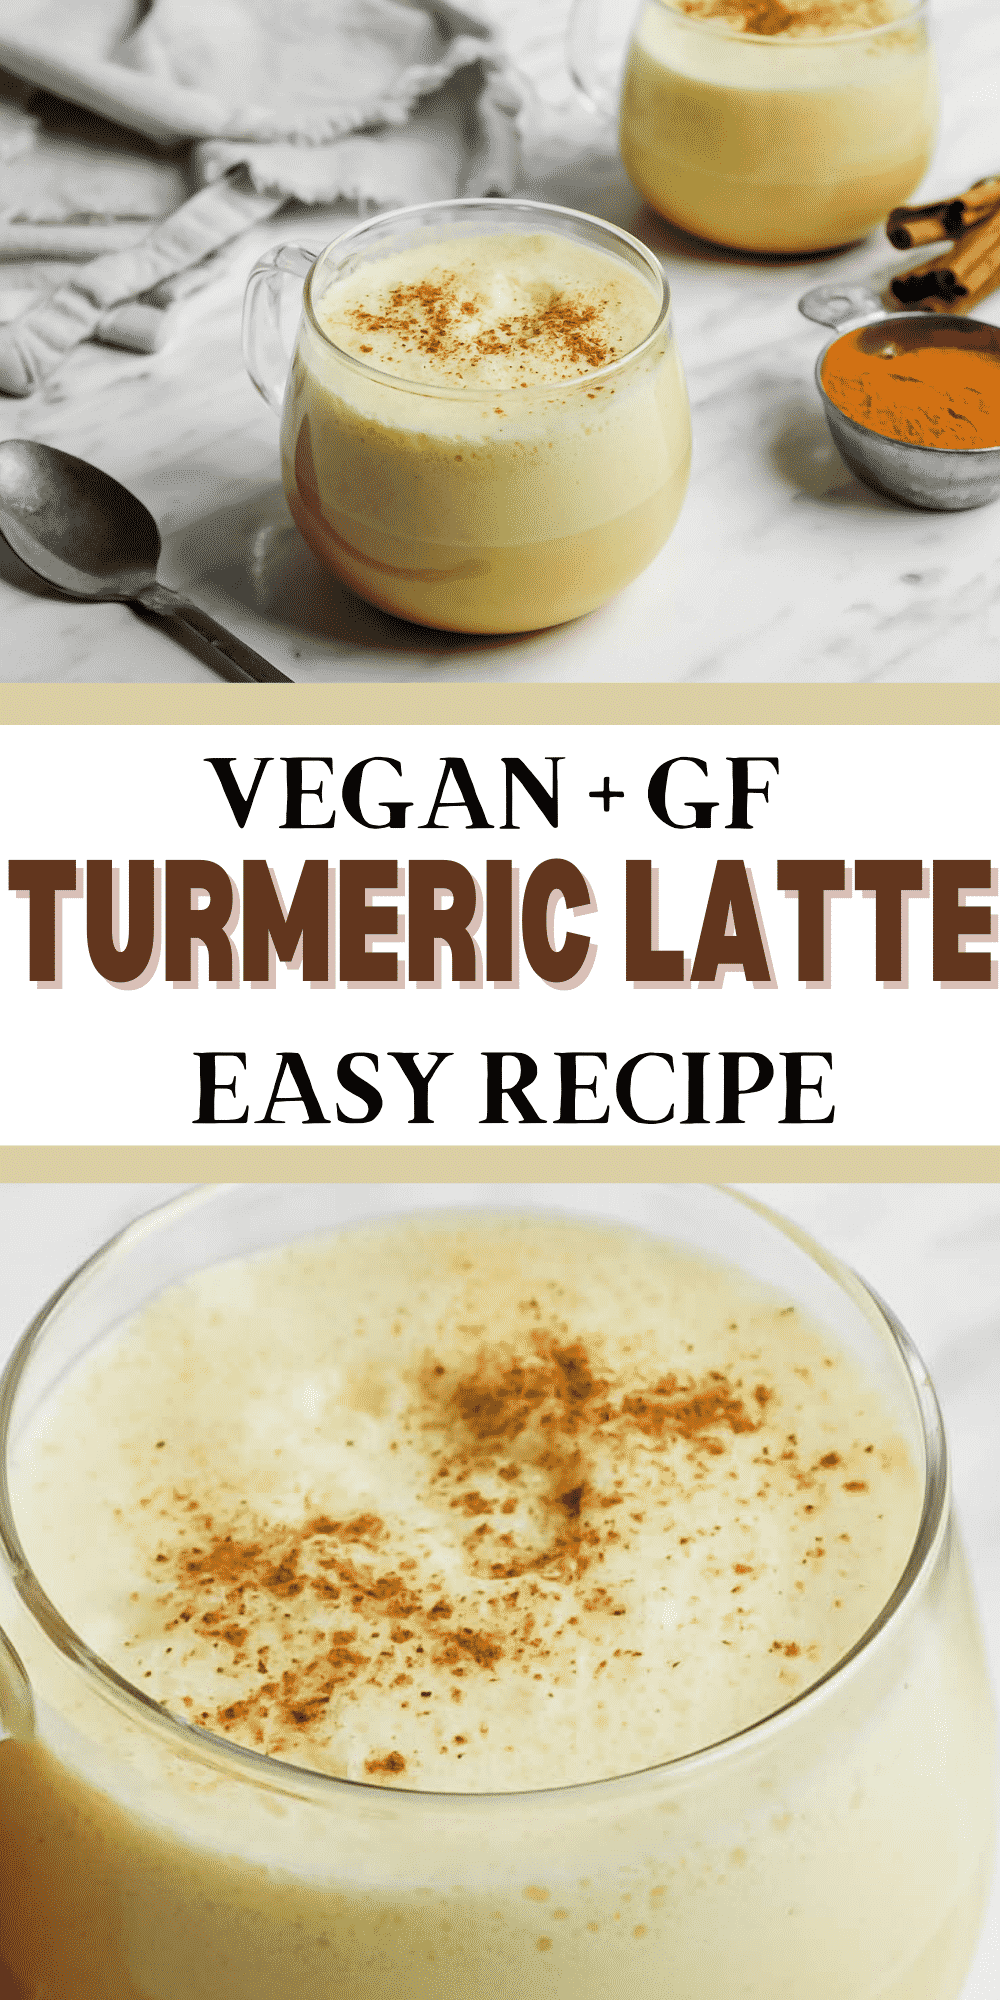 Pinterest pinnable pin for Turmeric lattes. Has two pictures of pale yellow foamy drink in clear mugs with text overlay saying: Vegan and GF Tumeric Latte easy recipe